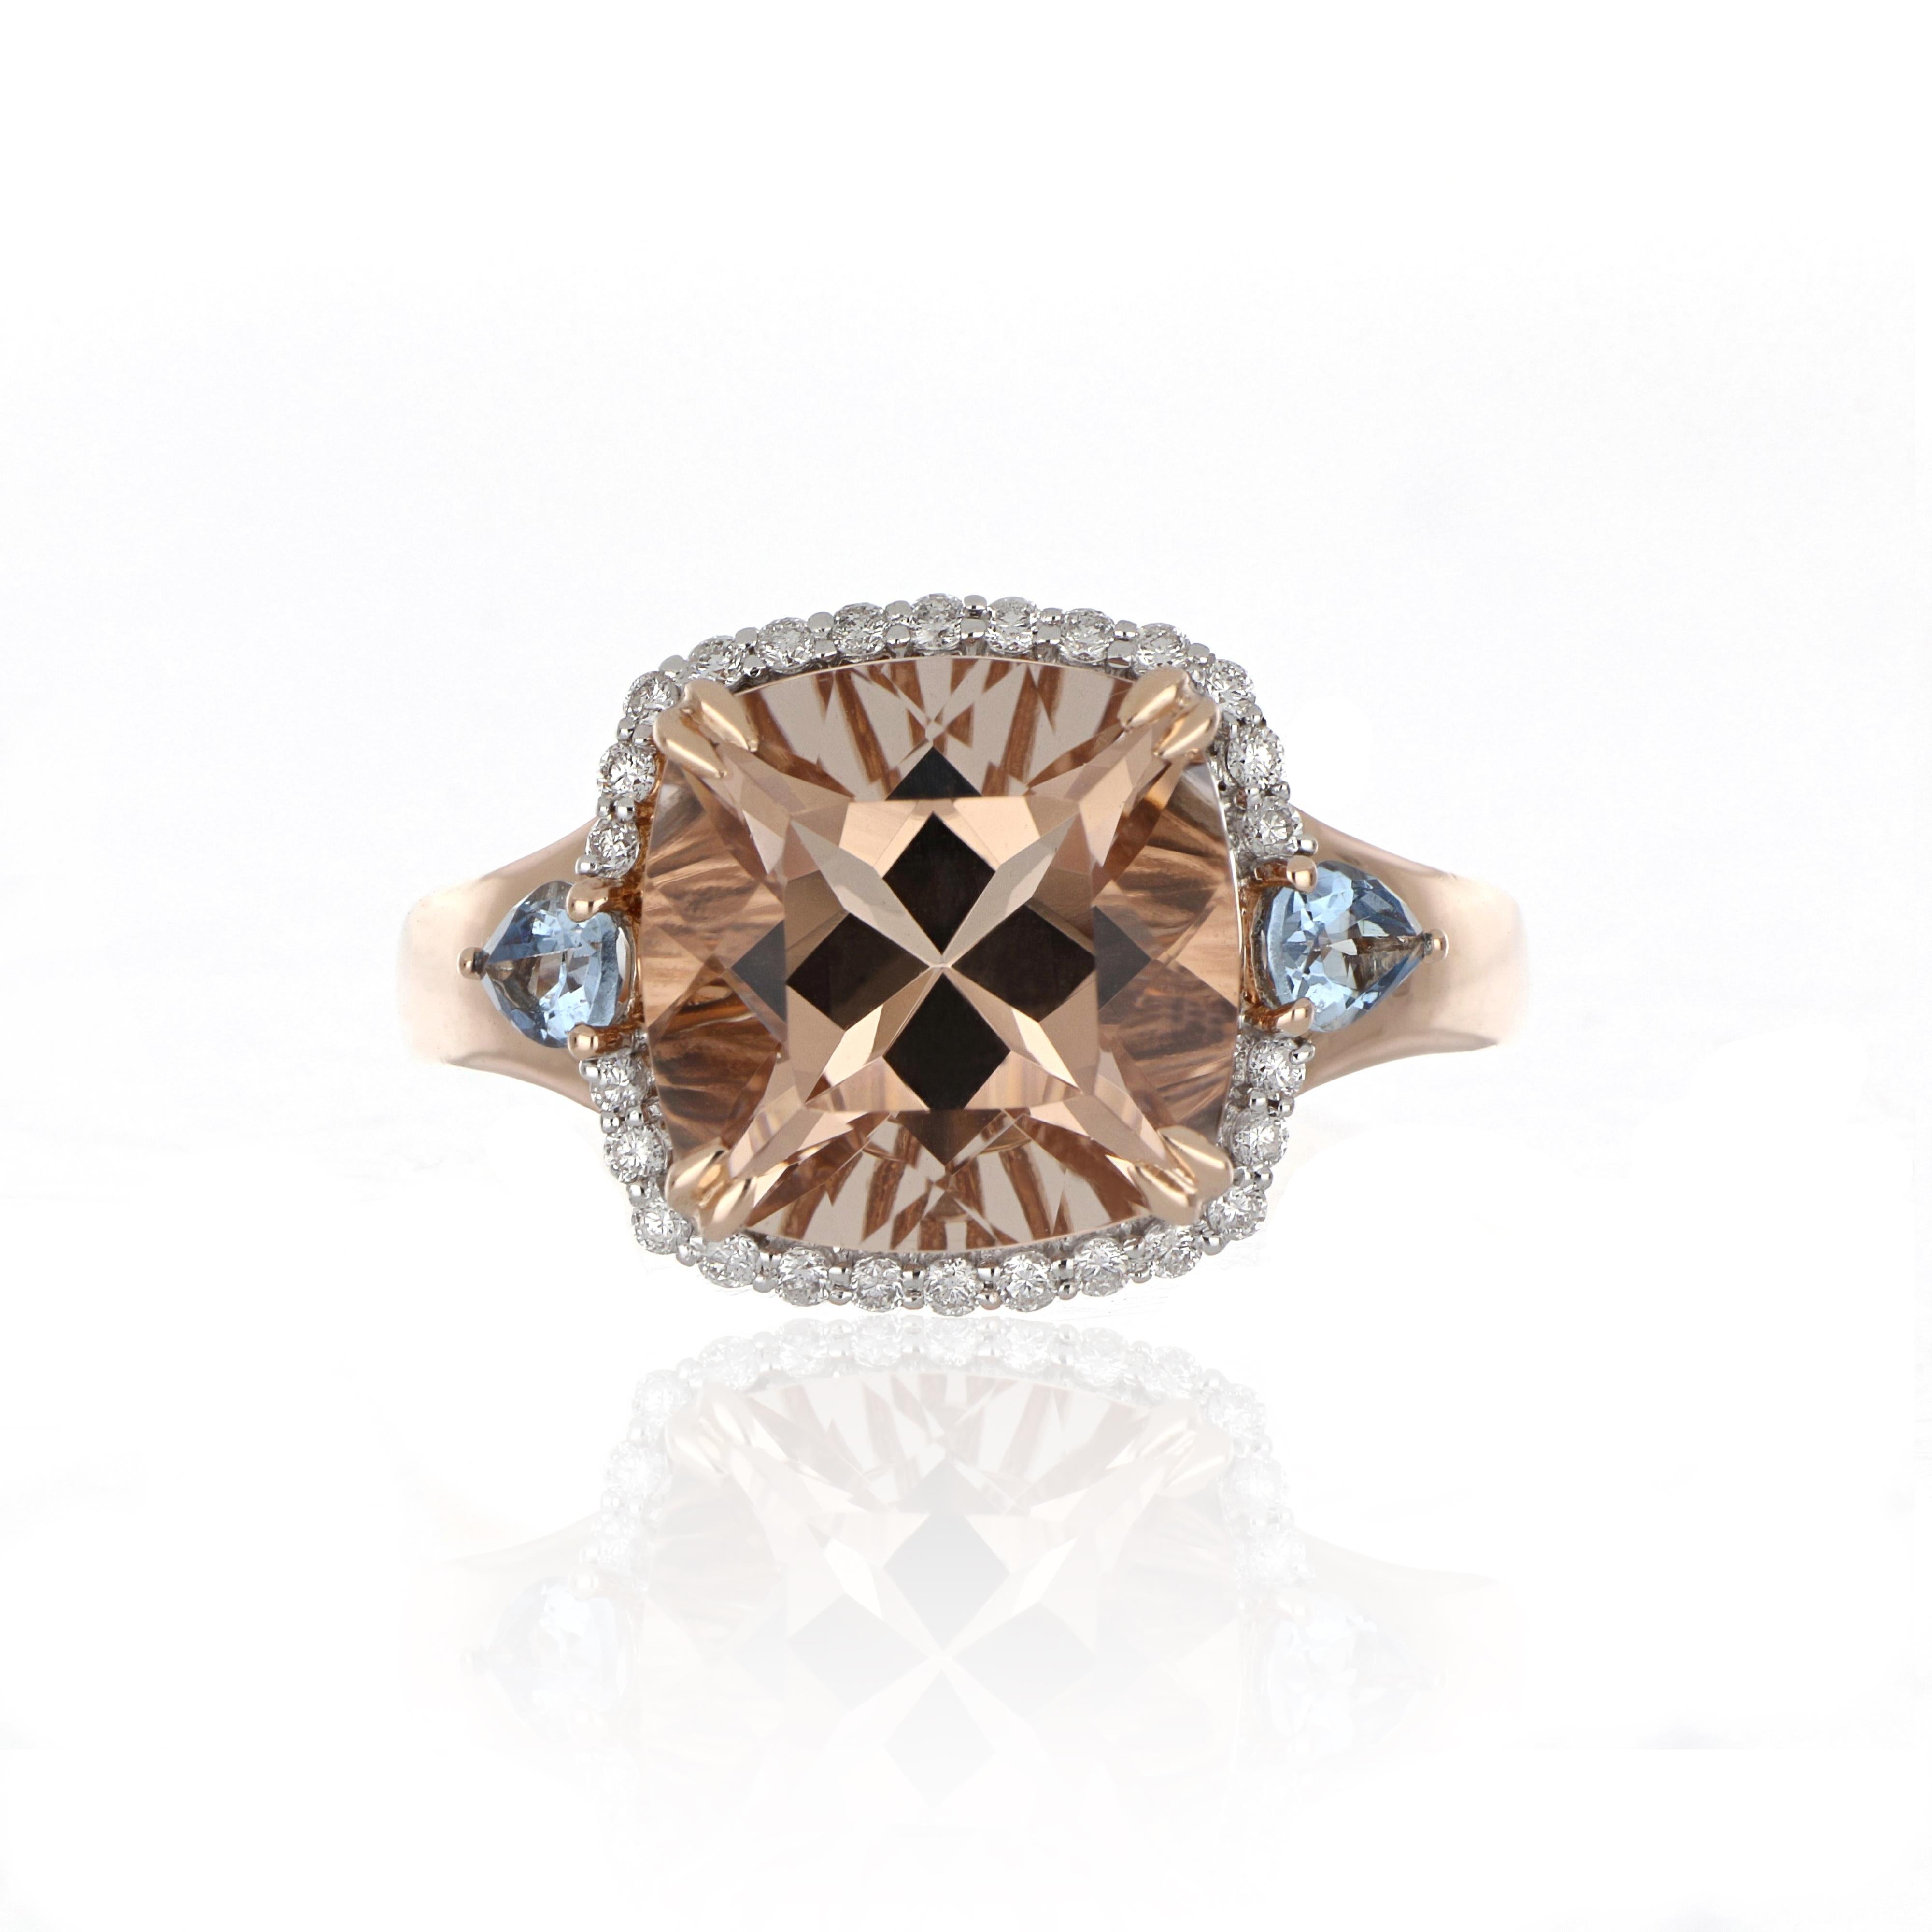 Elegant and exquisitely detailed three stone Cocktail 14K Ring, centre set with 5.19 Cts. Cushion Morganite surrounded by Diamonds, weighing approx. 0.22 cts. total carat weight accented on shoulder with Pear Shape 0.27 Cts. Aquamarines. Beautifully